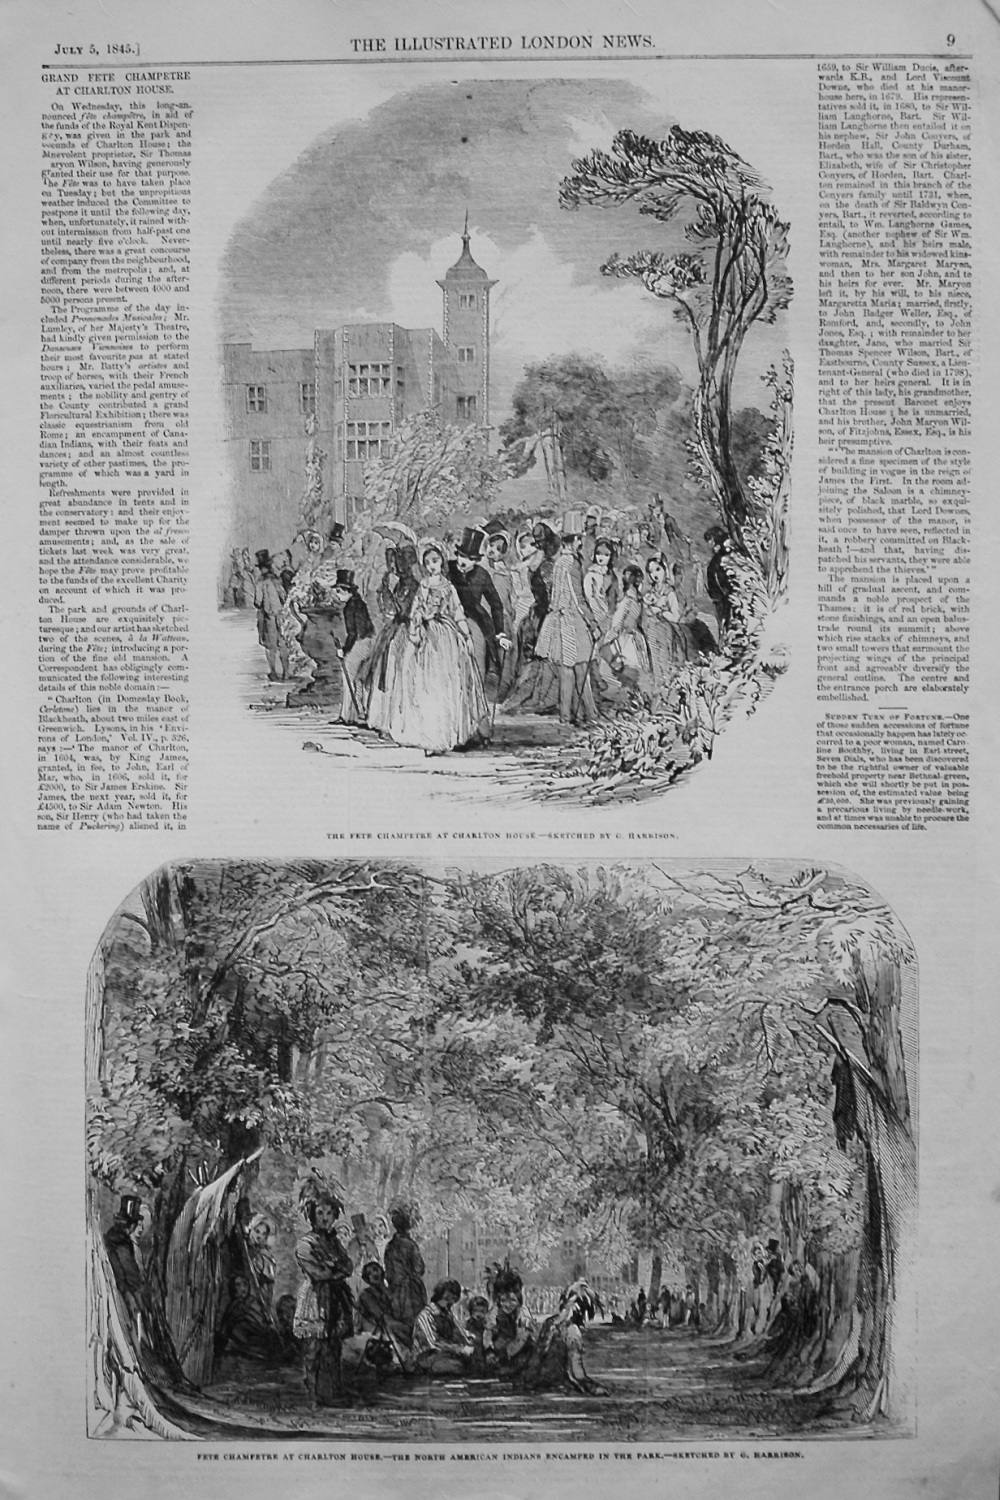 Grand Fete Champetre at Charlton House. 1845